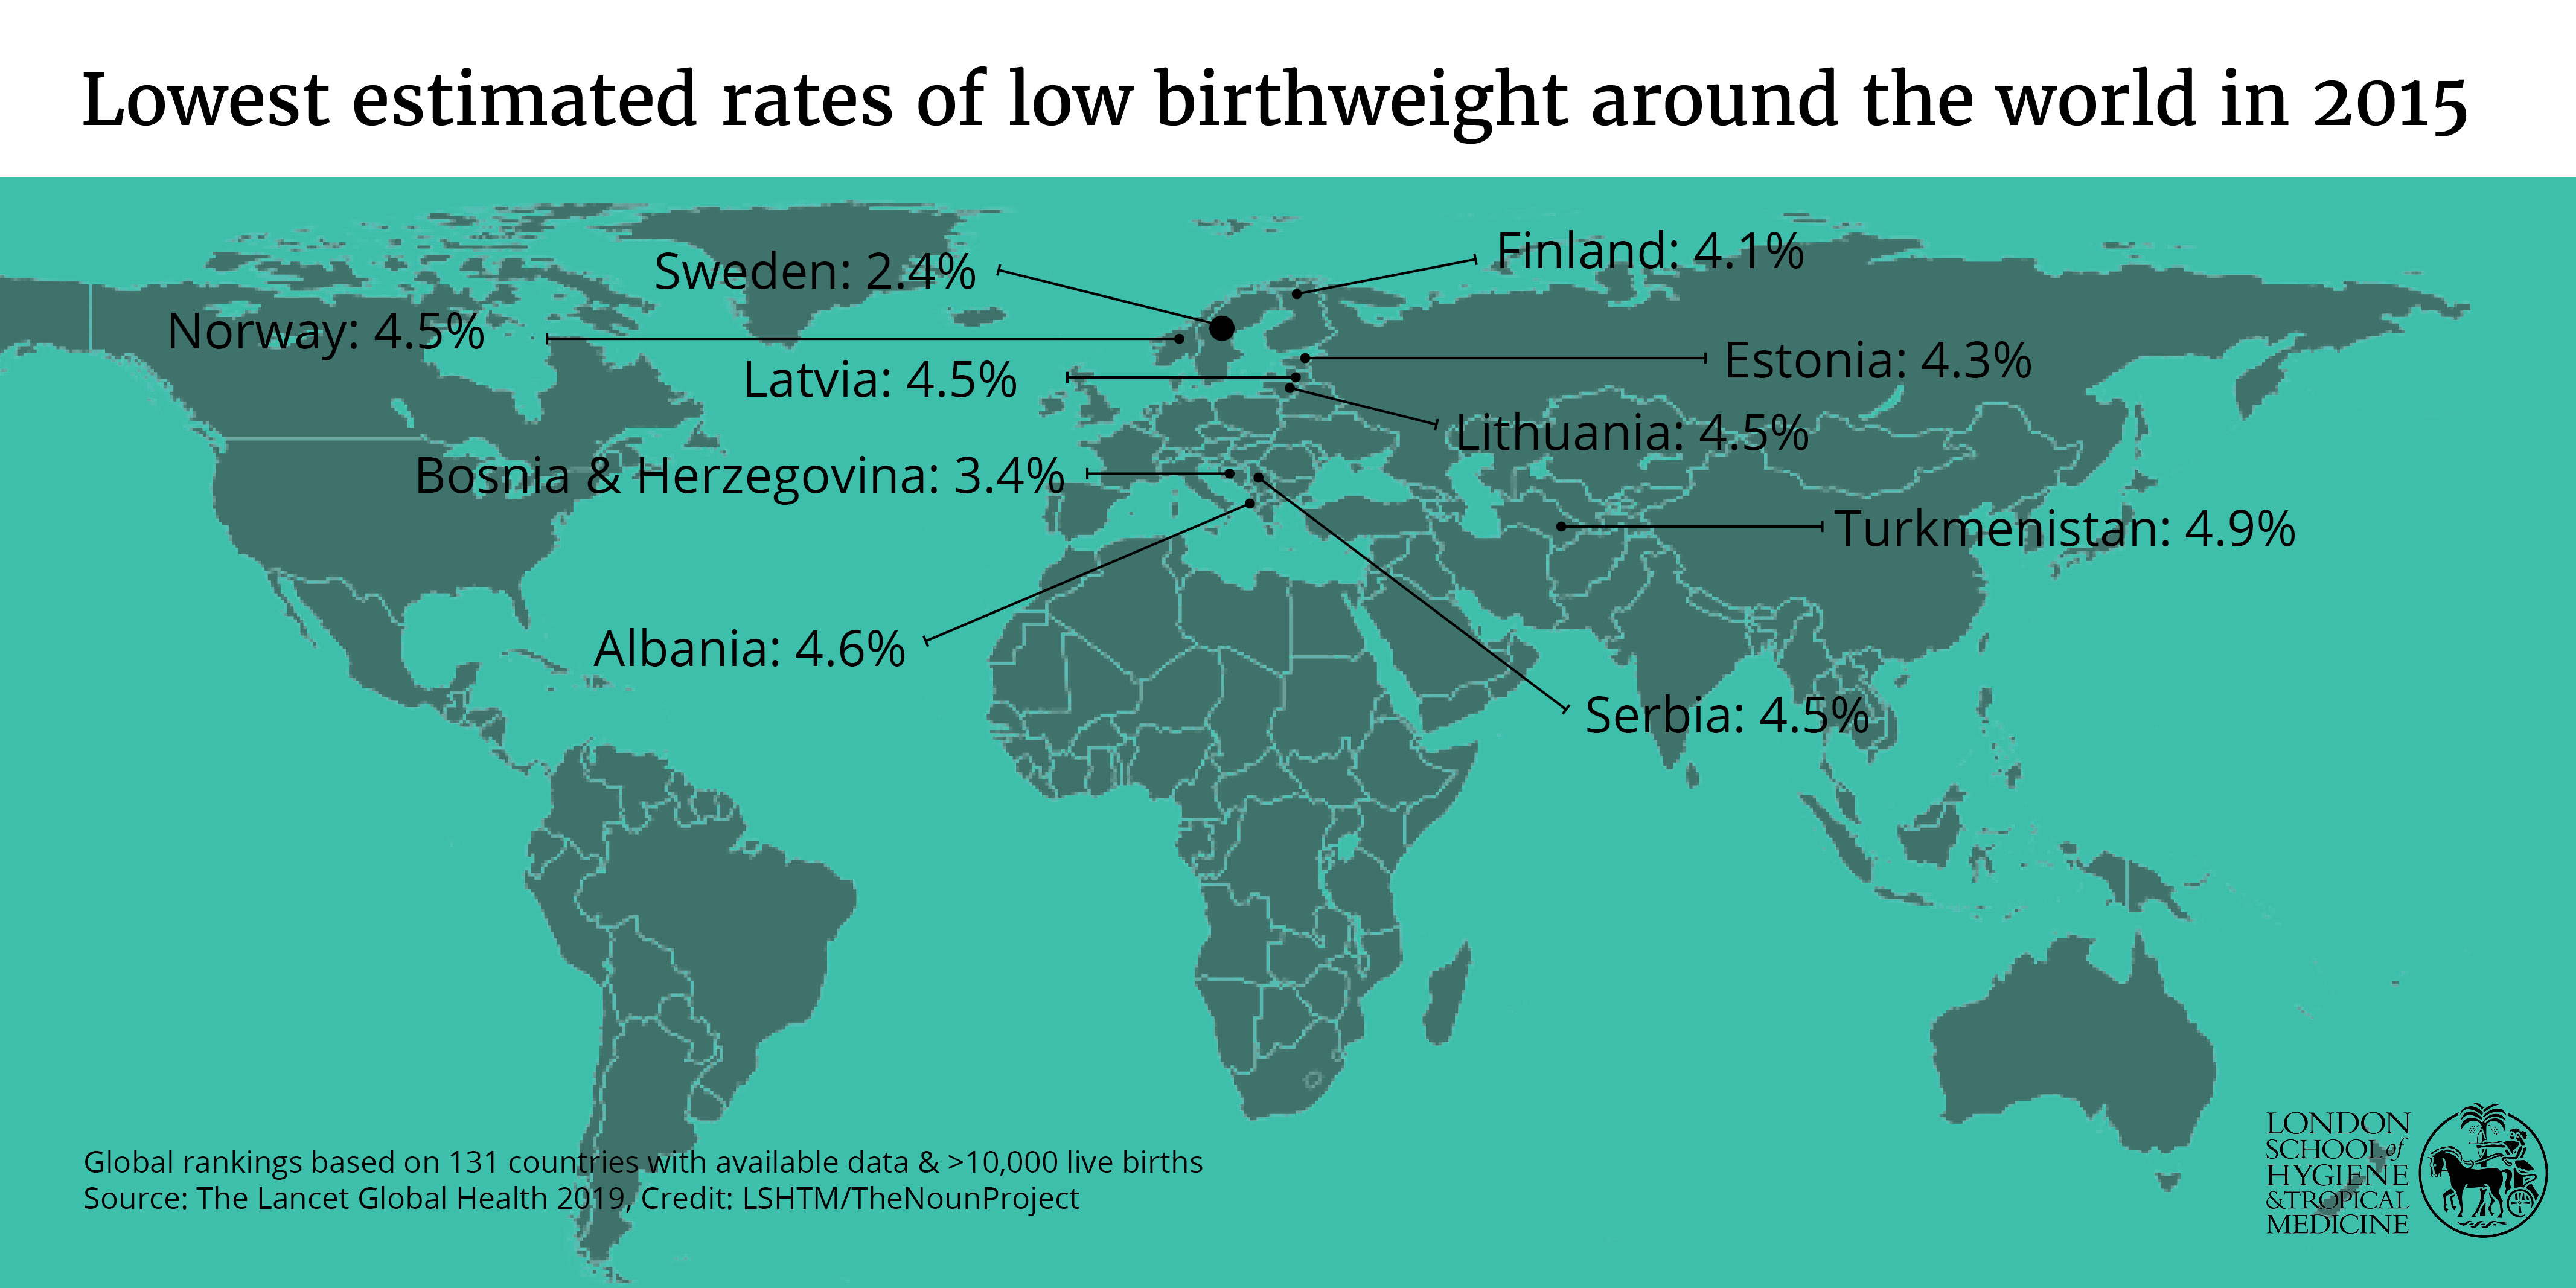 Lowest estimated rates of low birthweight around the world